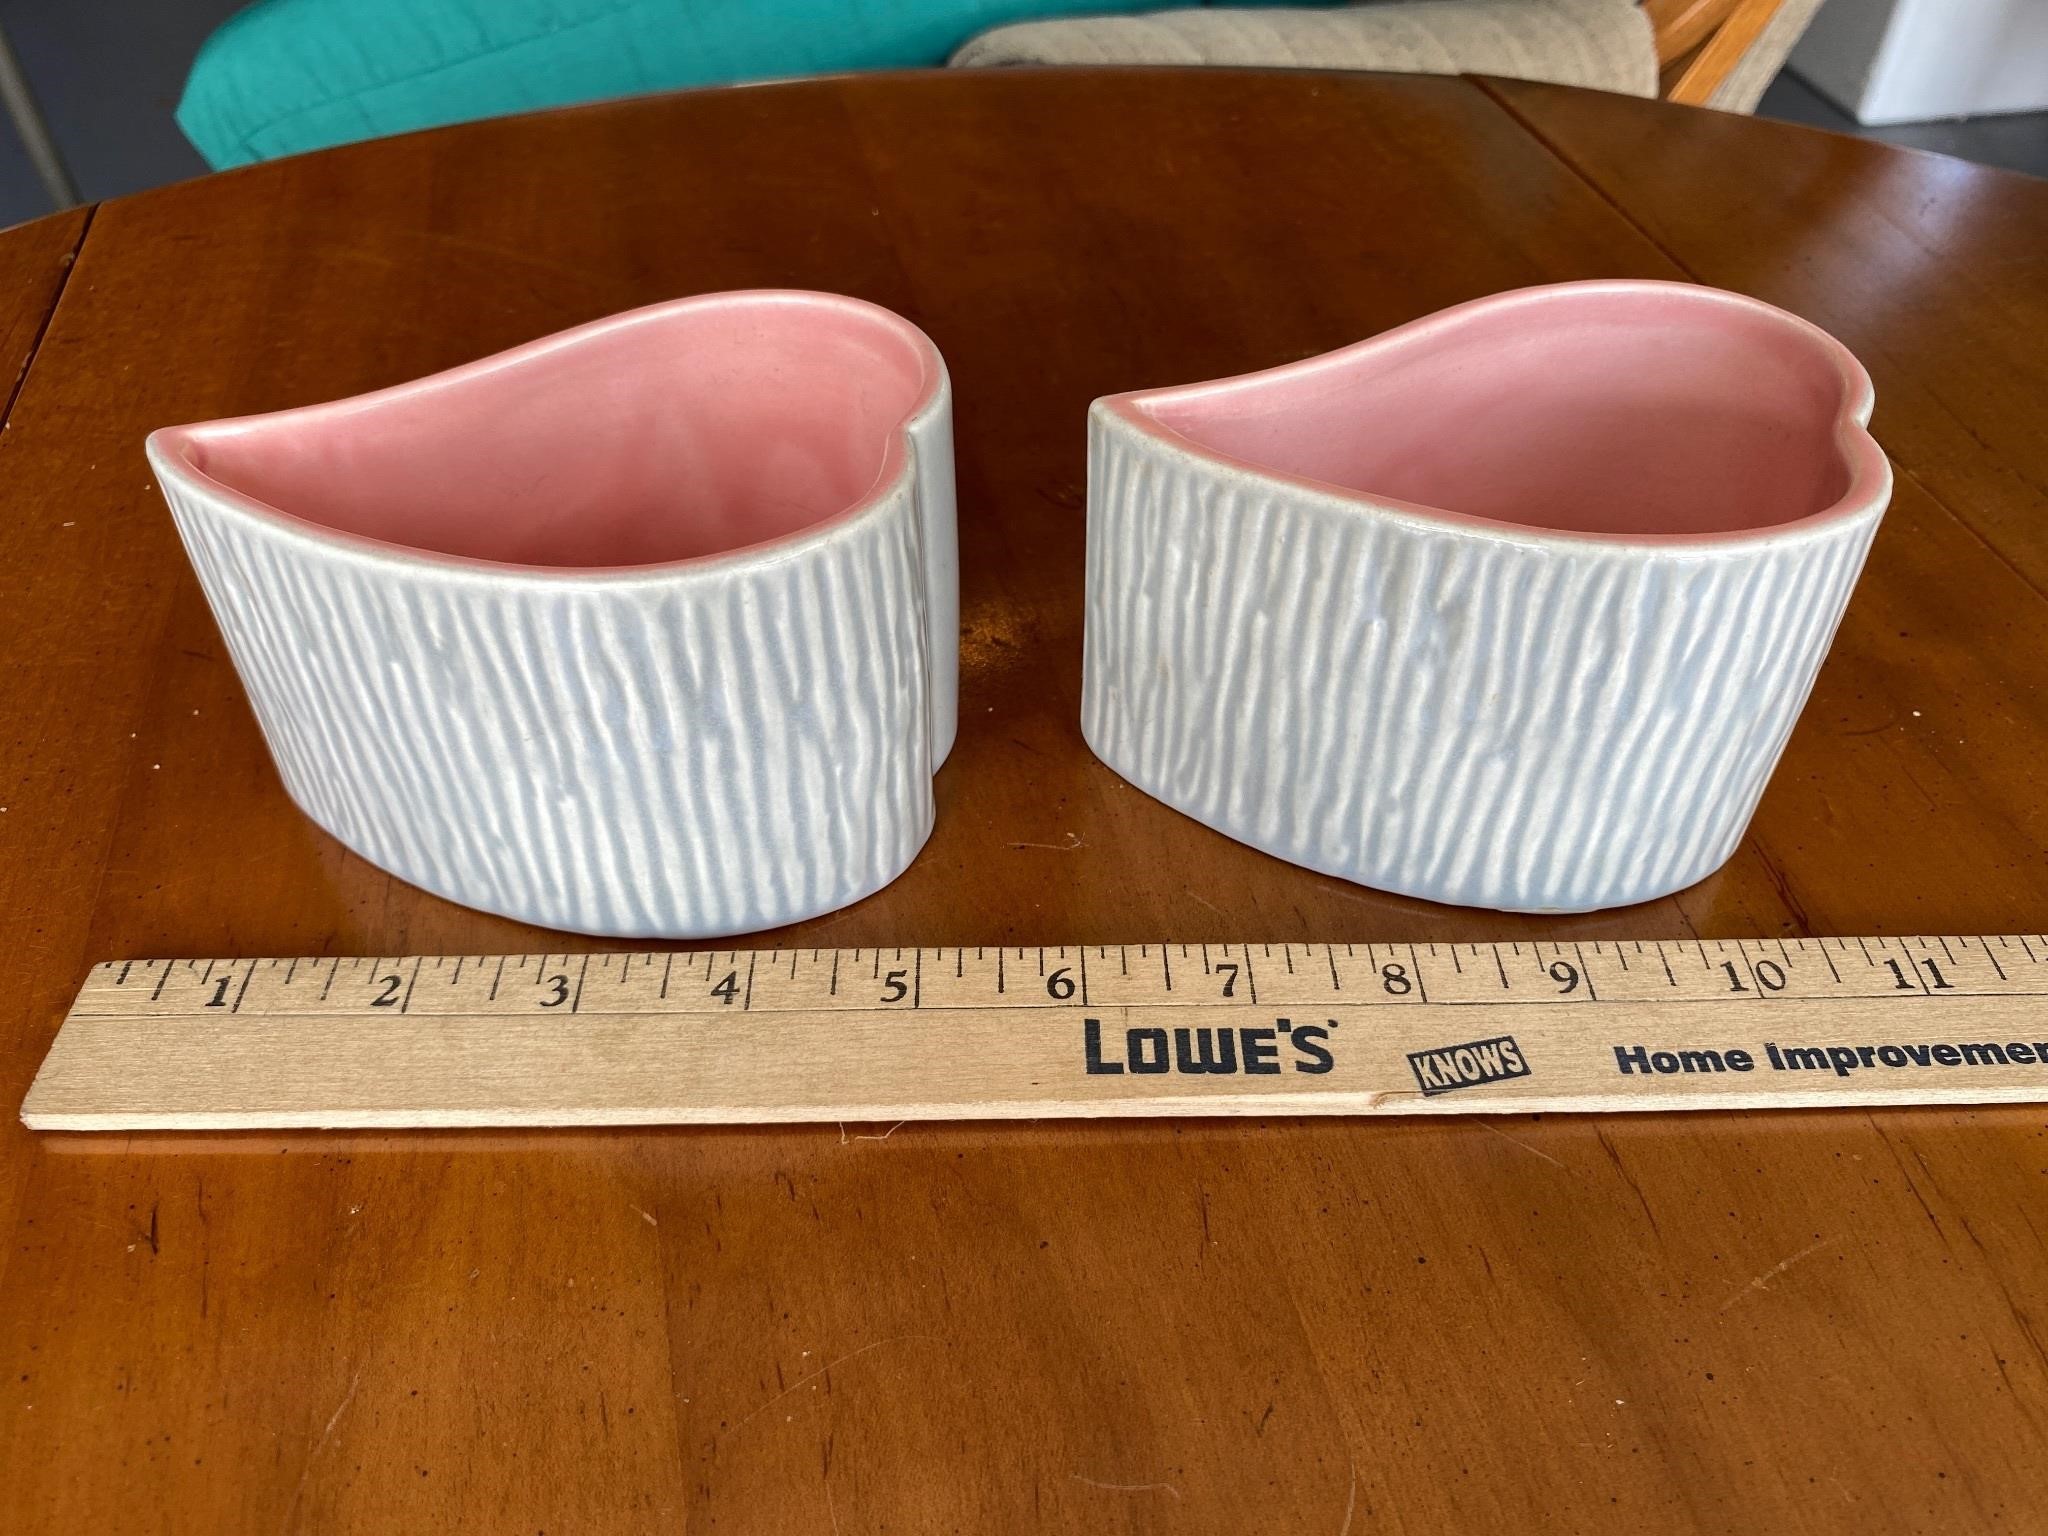 Red Wing Pottery Candle Holders